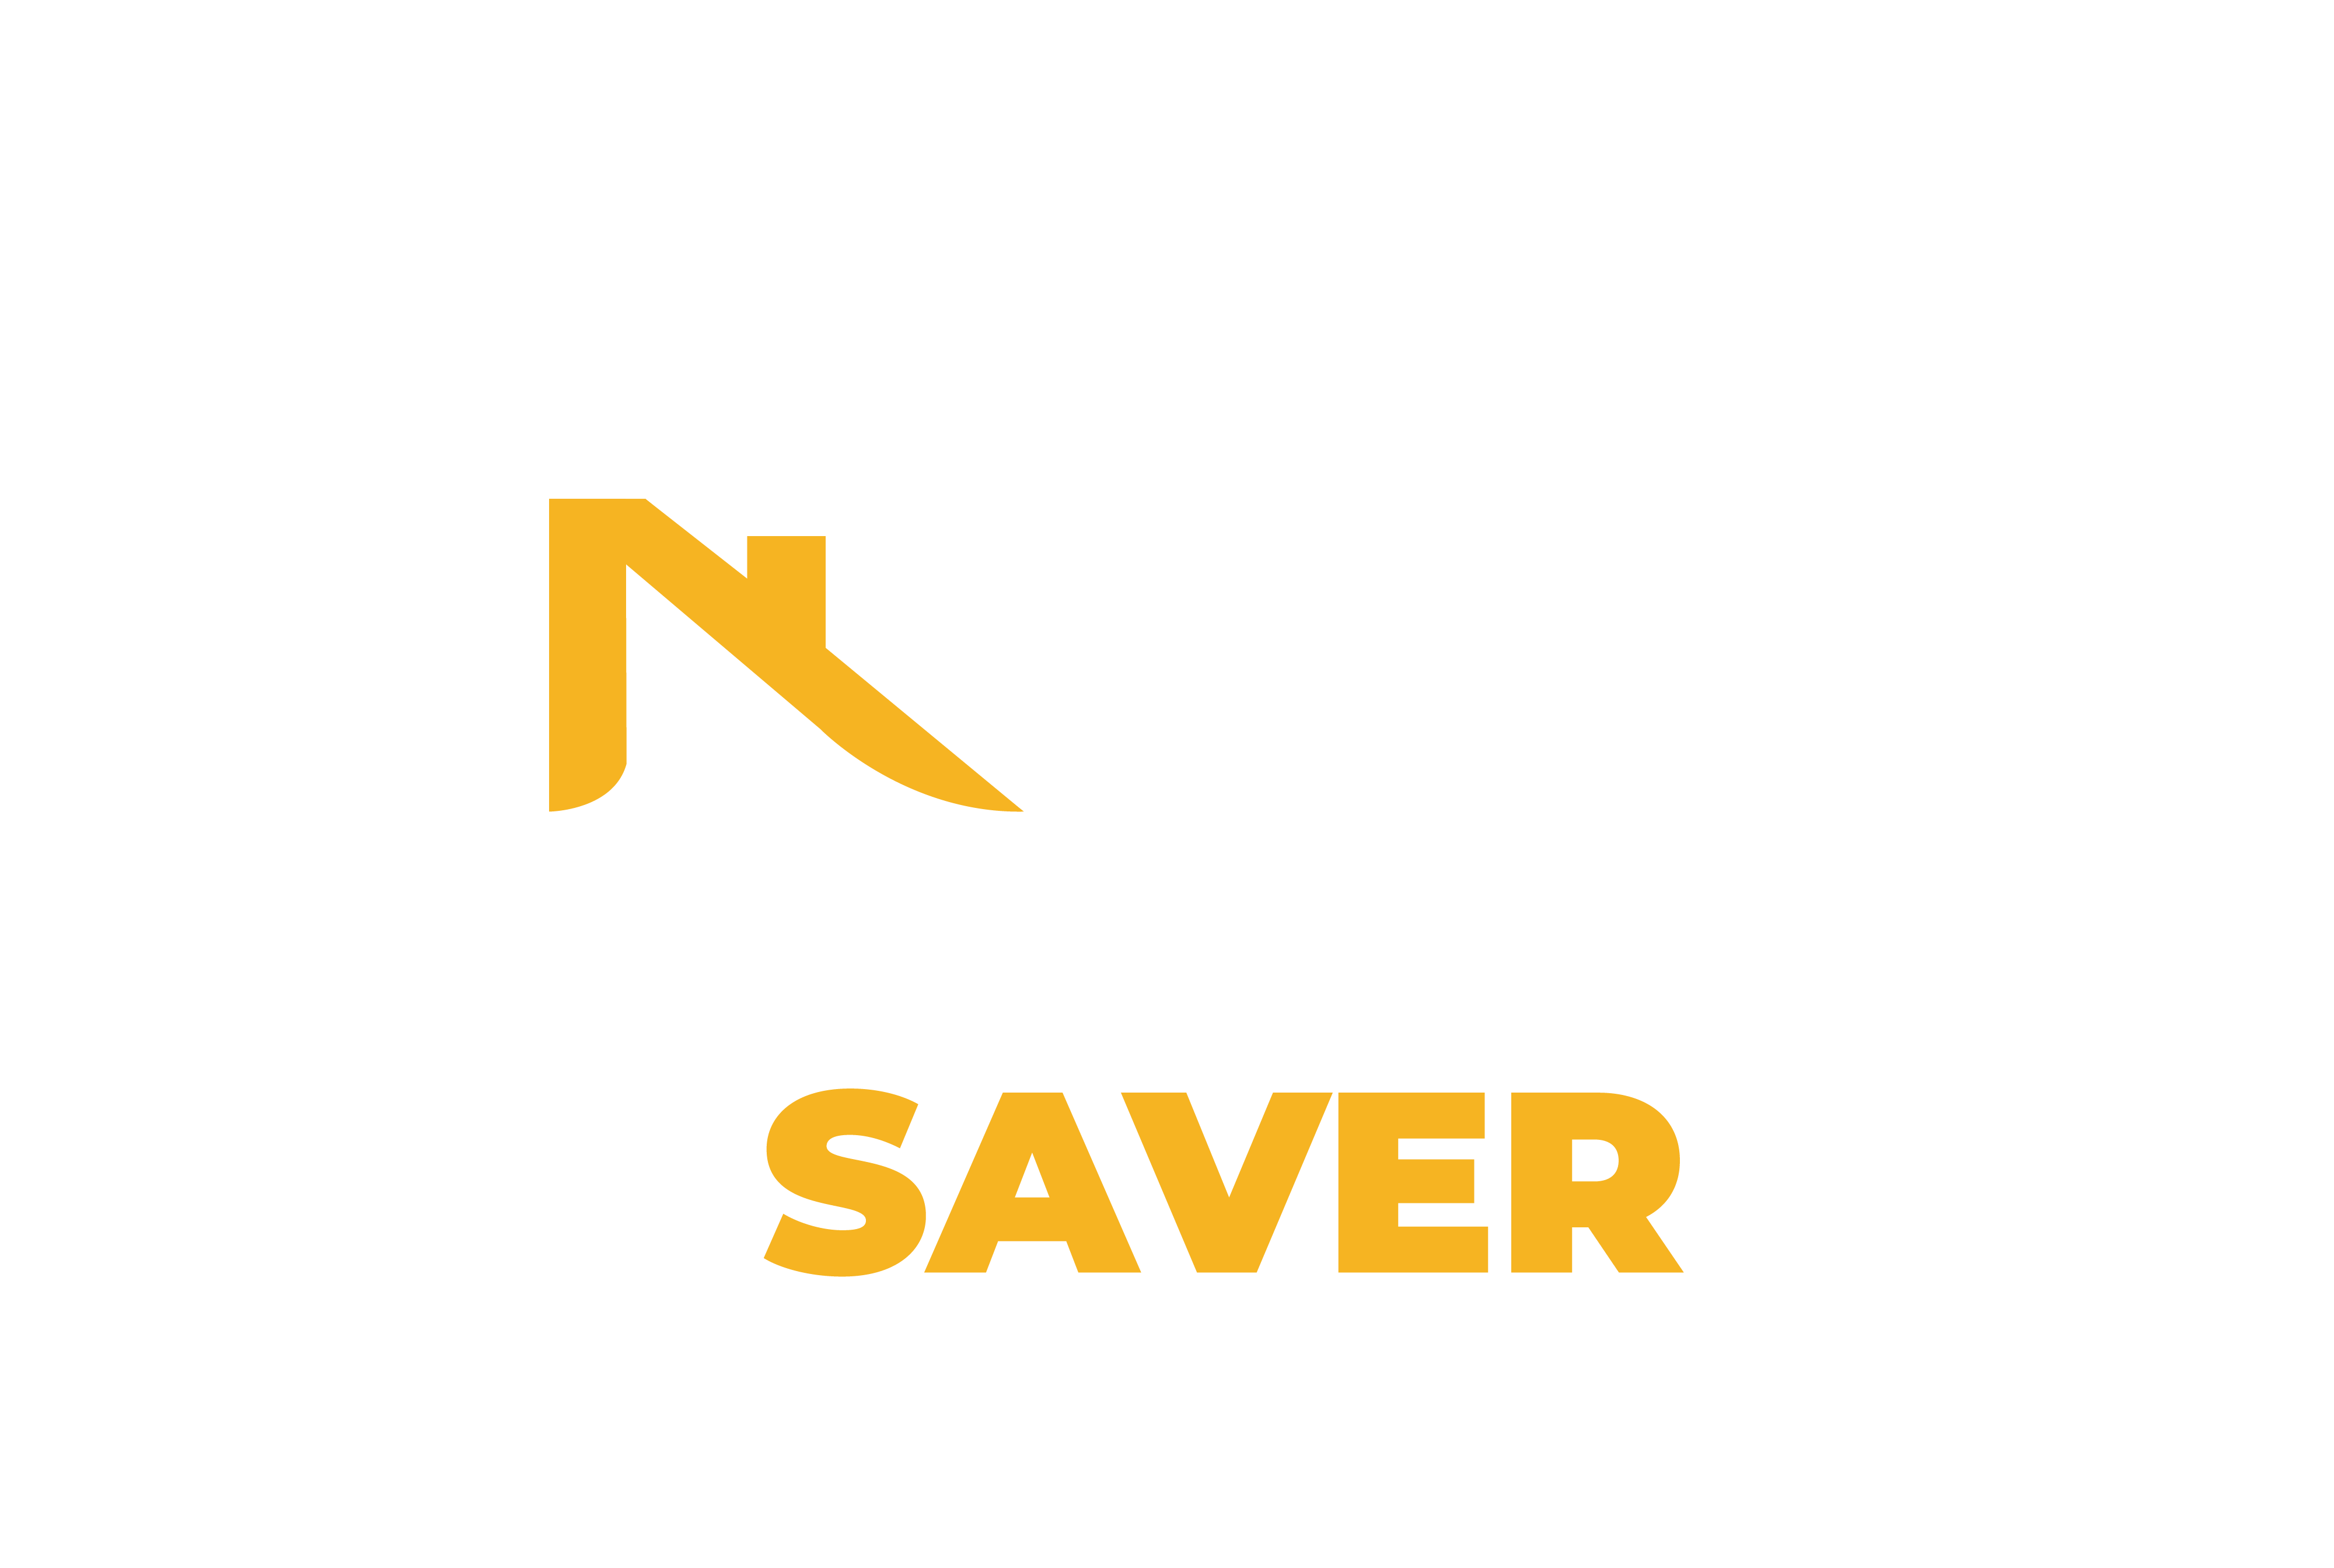 The Roof Saver